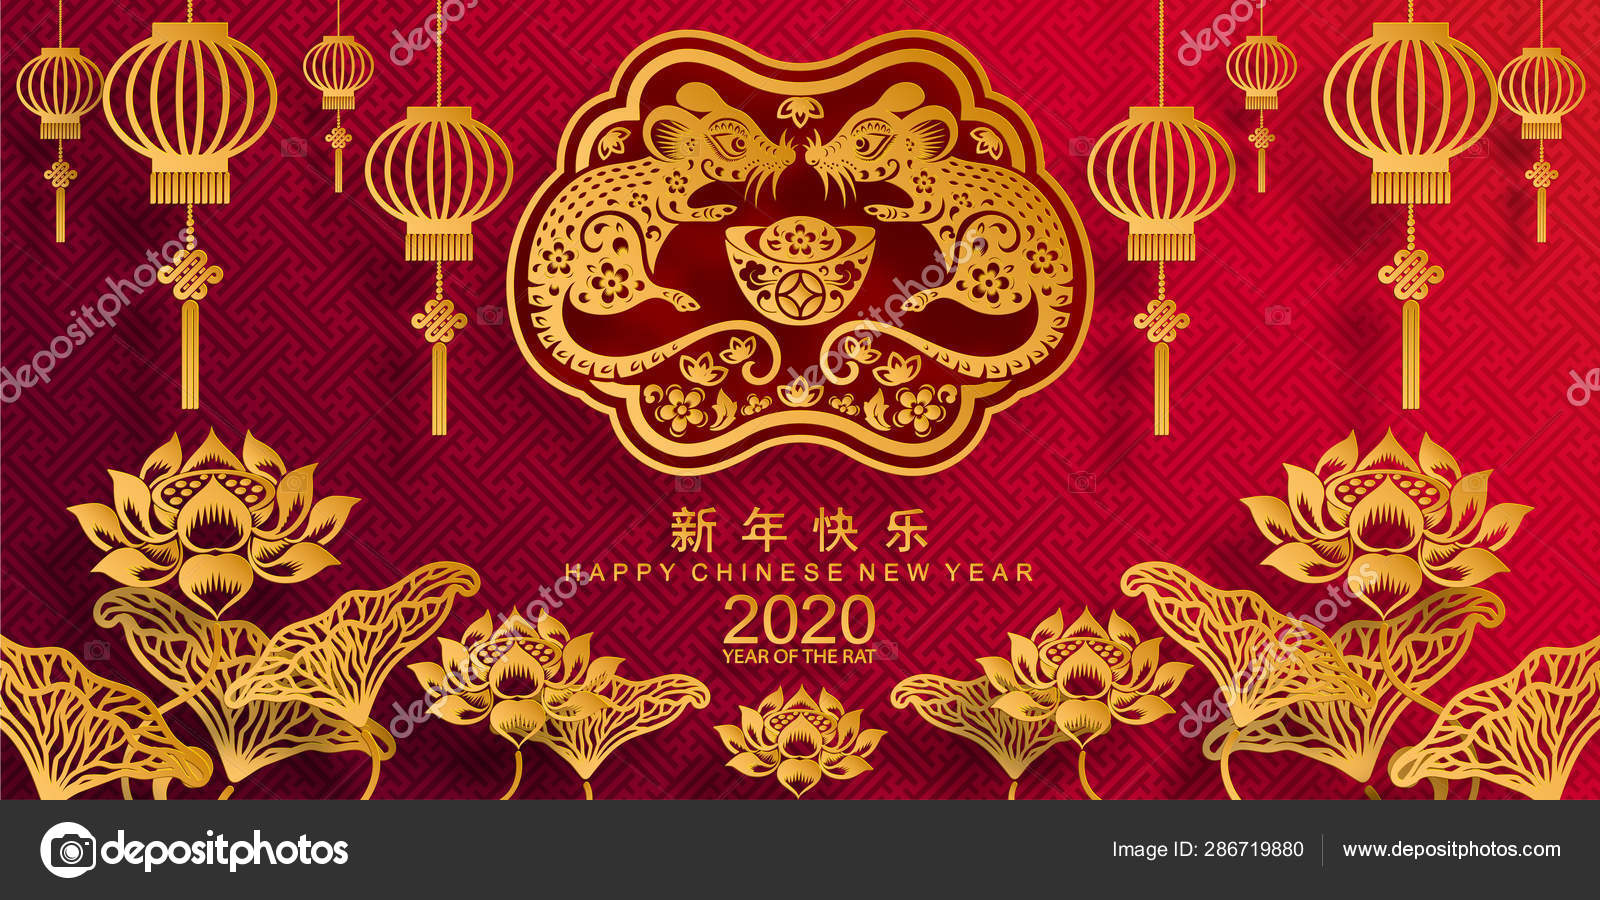 YEELE 12x8ft Chinese New Year Backdrop Chinese Peony Year of The Rat Red and Gloden Photography Background 2020 Spring Festival Portrait Photo Booth Prop Digital Wallpaper